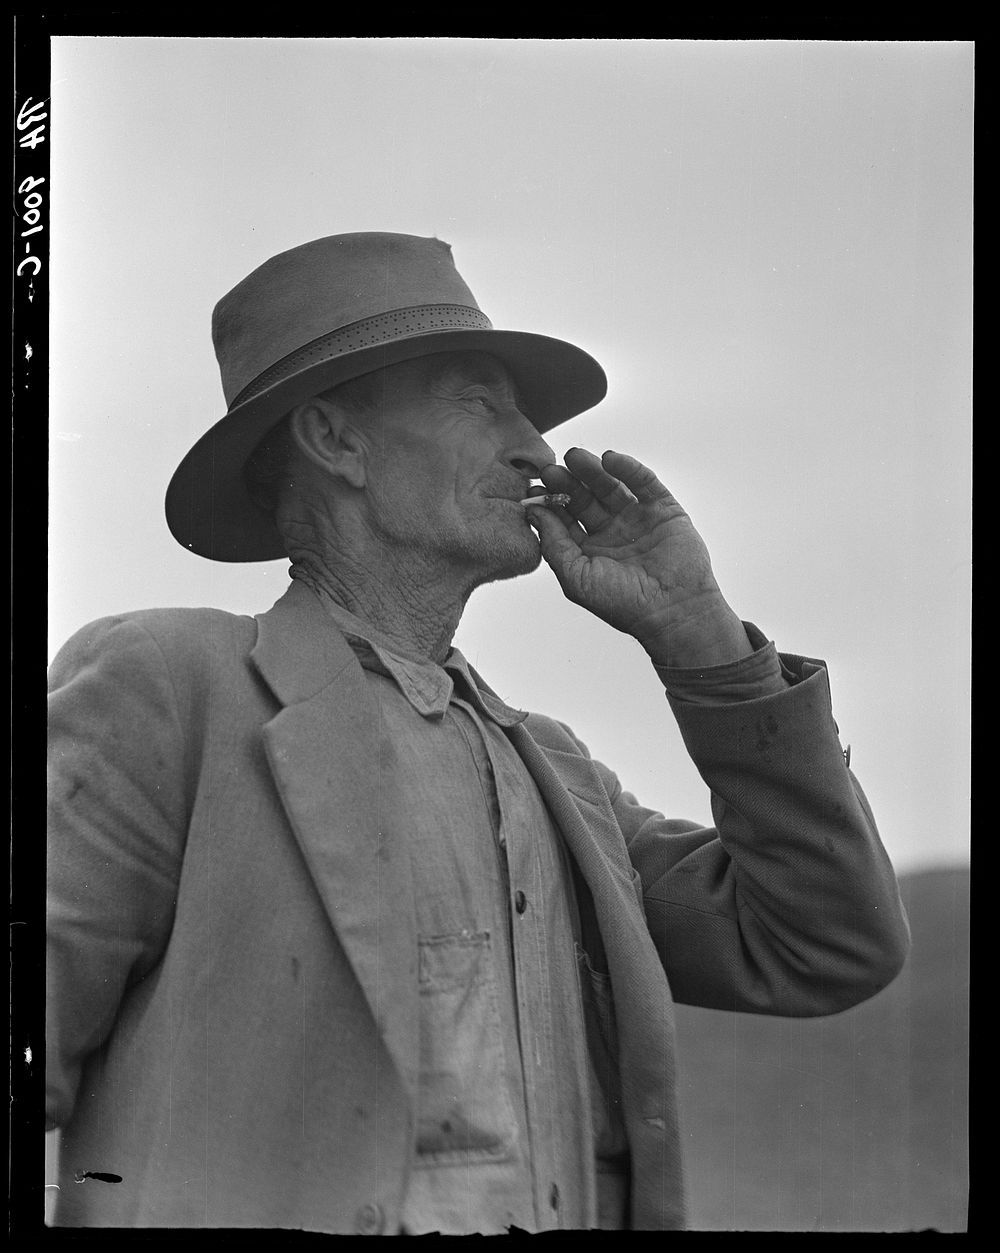 [Untitled photo, possibly related to: This man is a labor contractor in the pea fields of California. "One-Eye" Charlie…